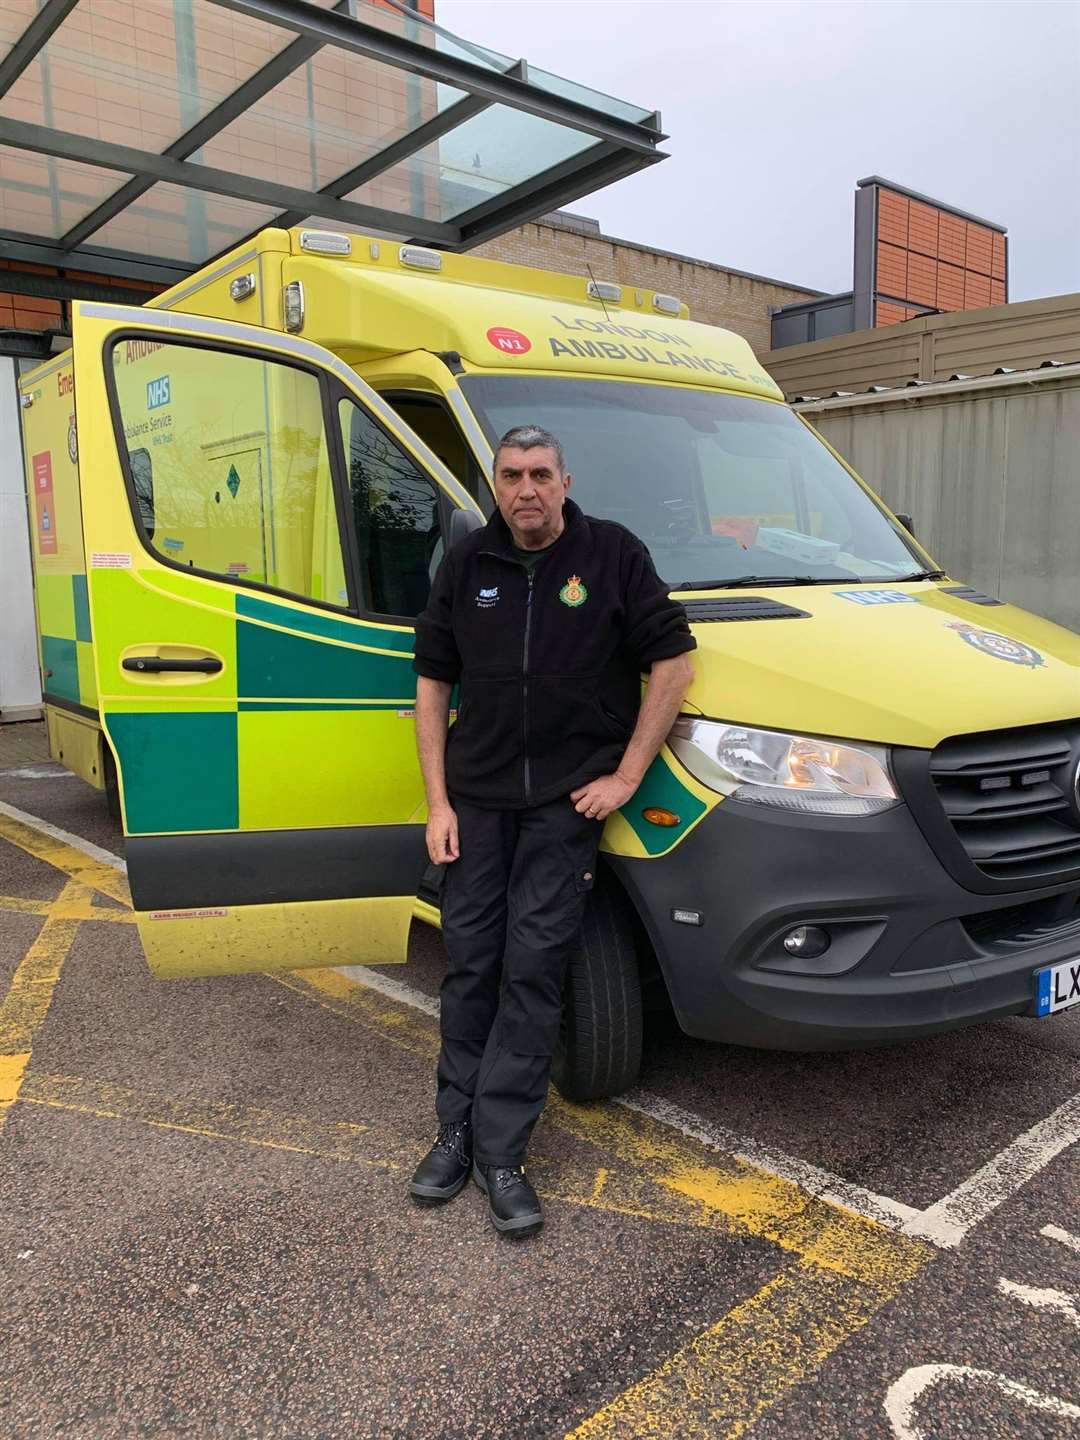 Ex-police driver Melvin Hopper, who runs The Heritage micro pub on Sheppey, is now driving London ambulances to help the stretched service during the coronavirus pandemic